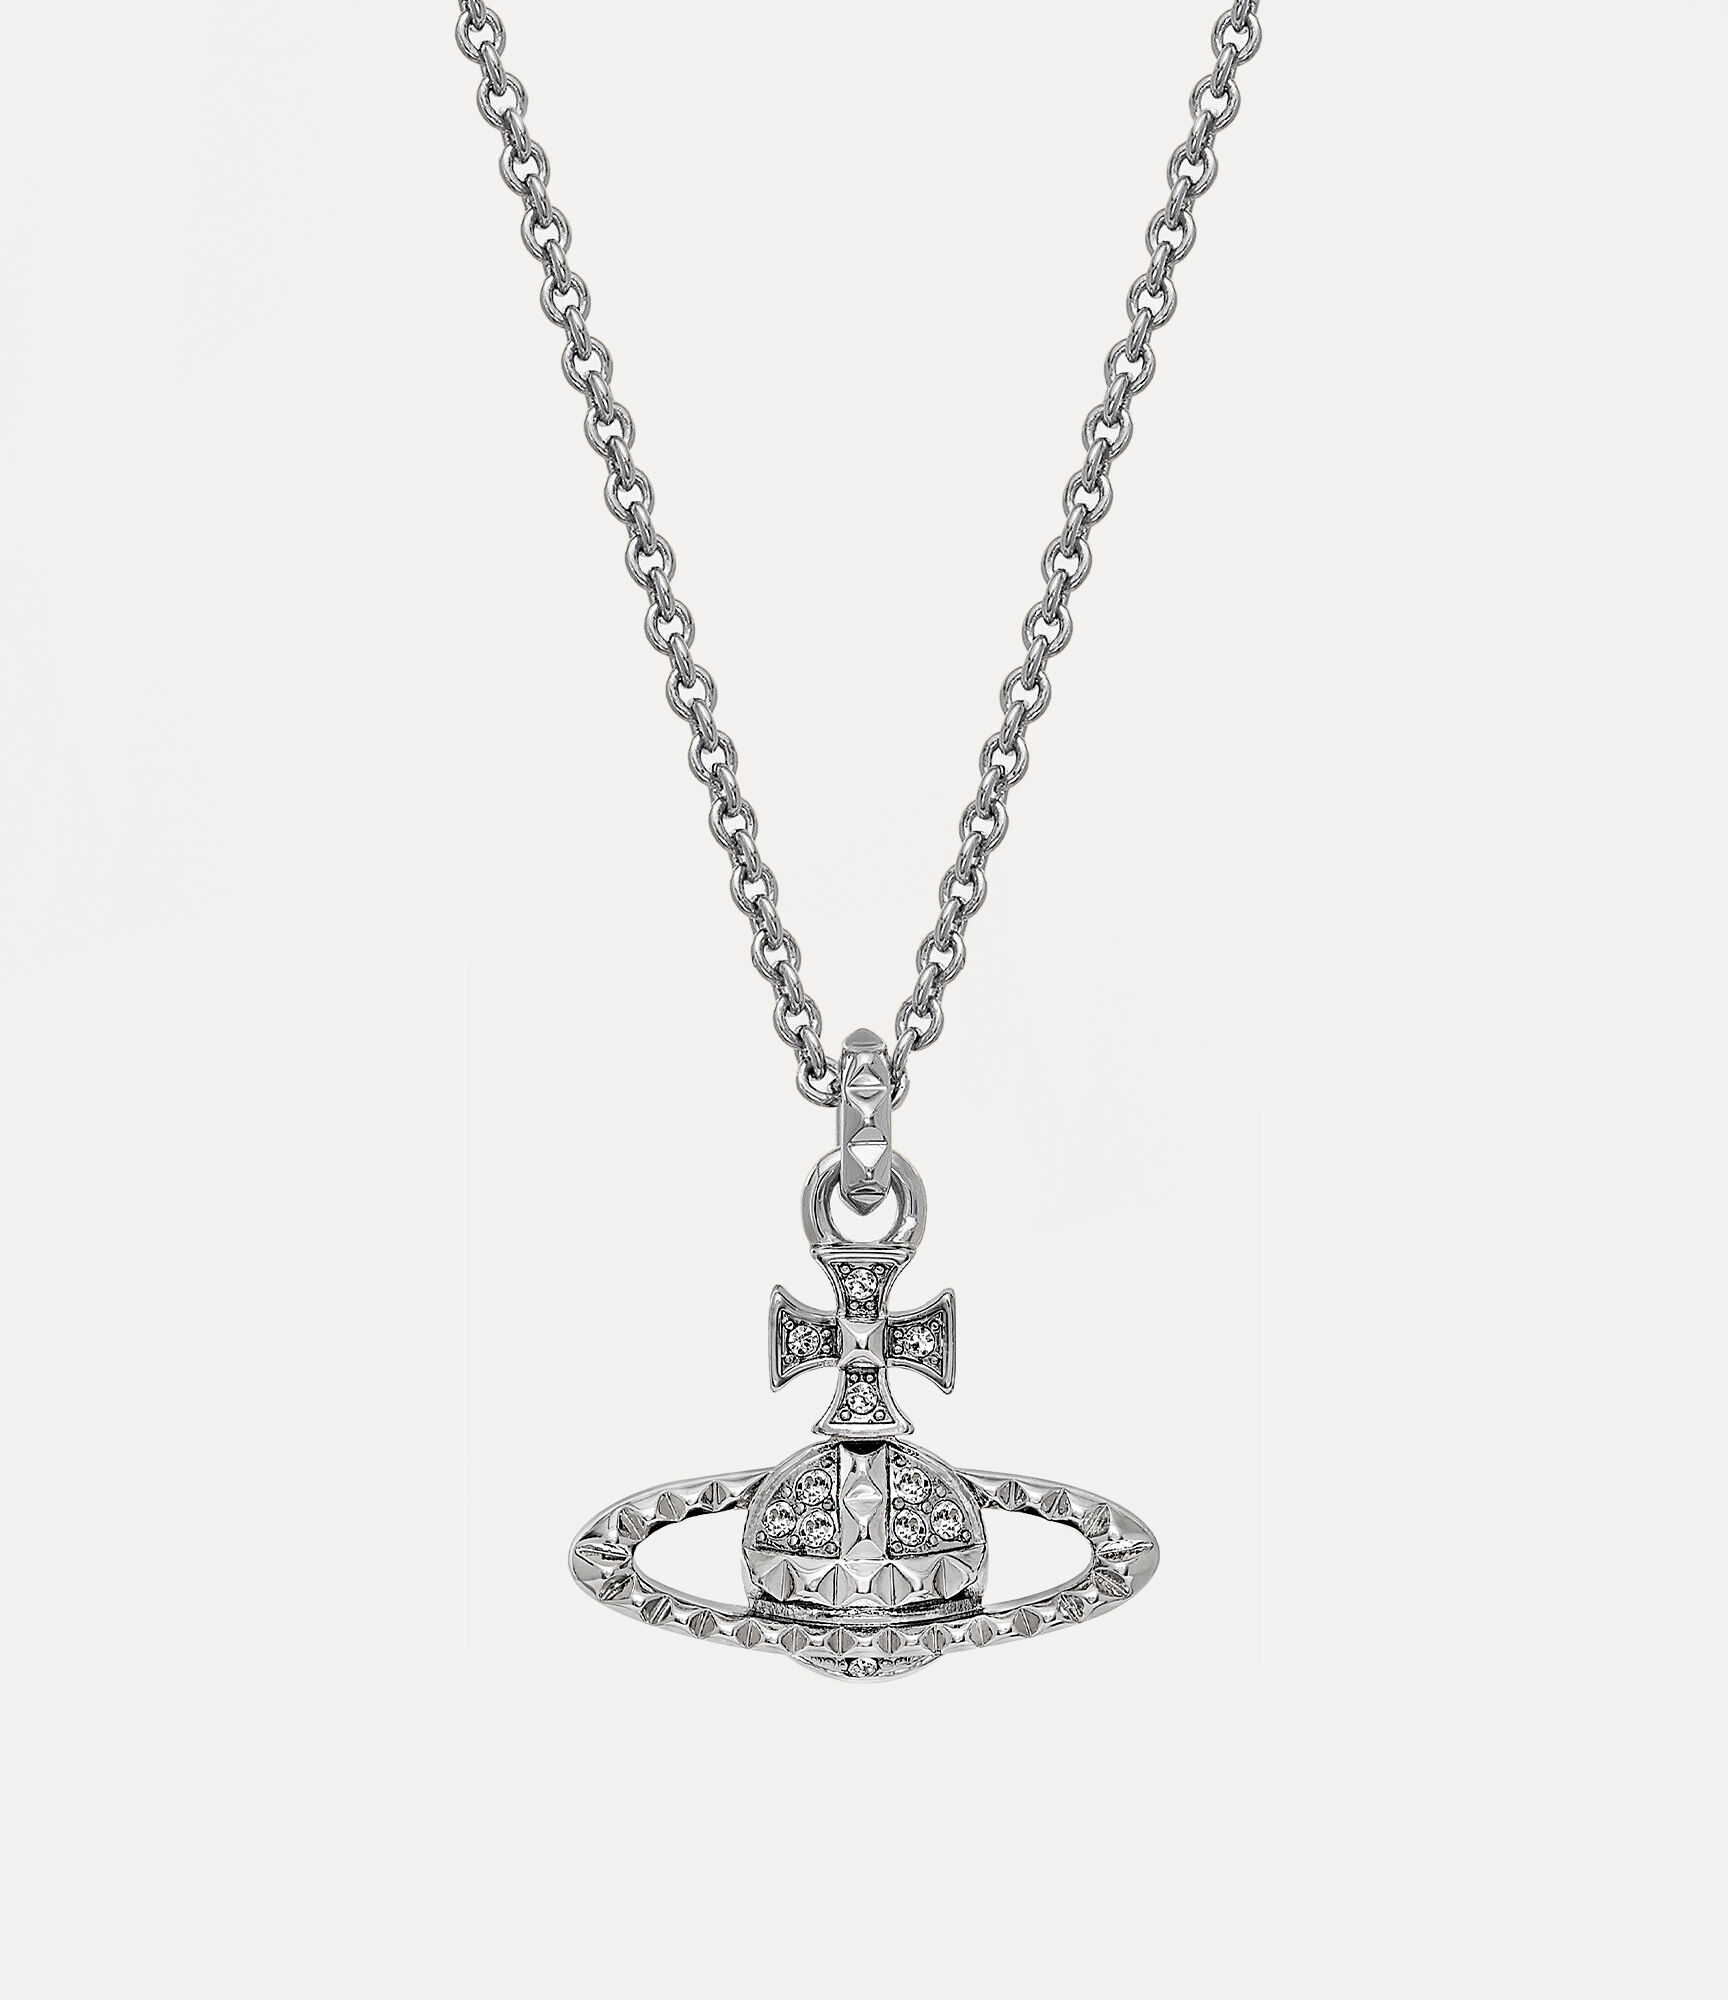 The Mayfair Bas Relief Pendant necklace features silver-tone